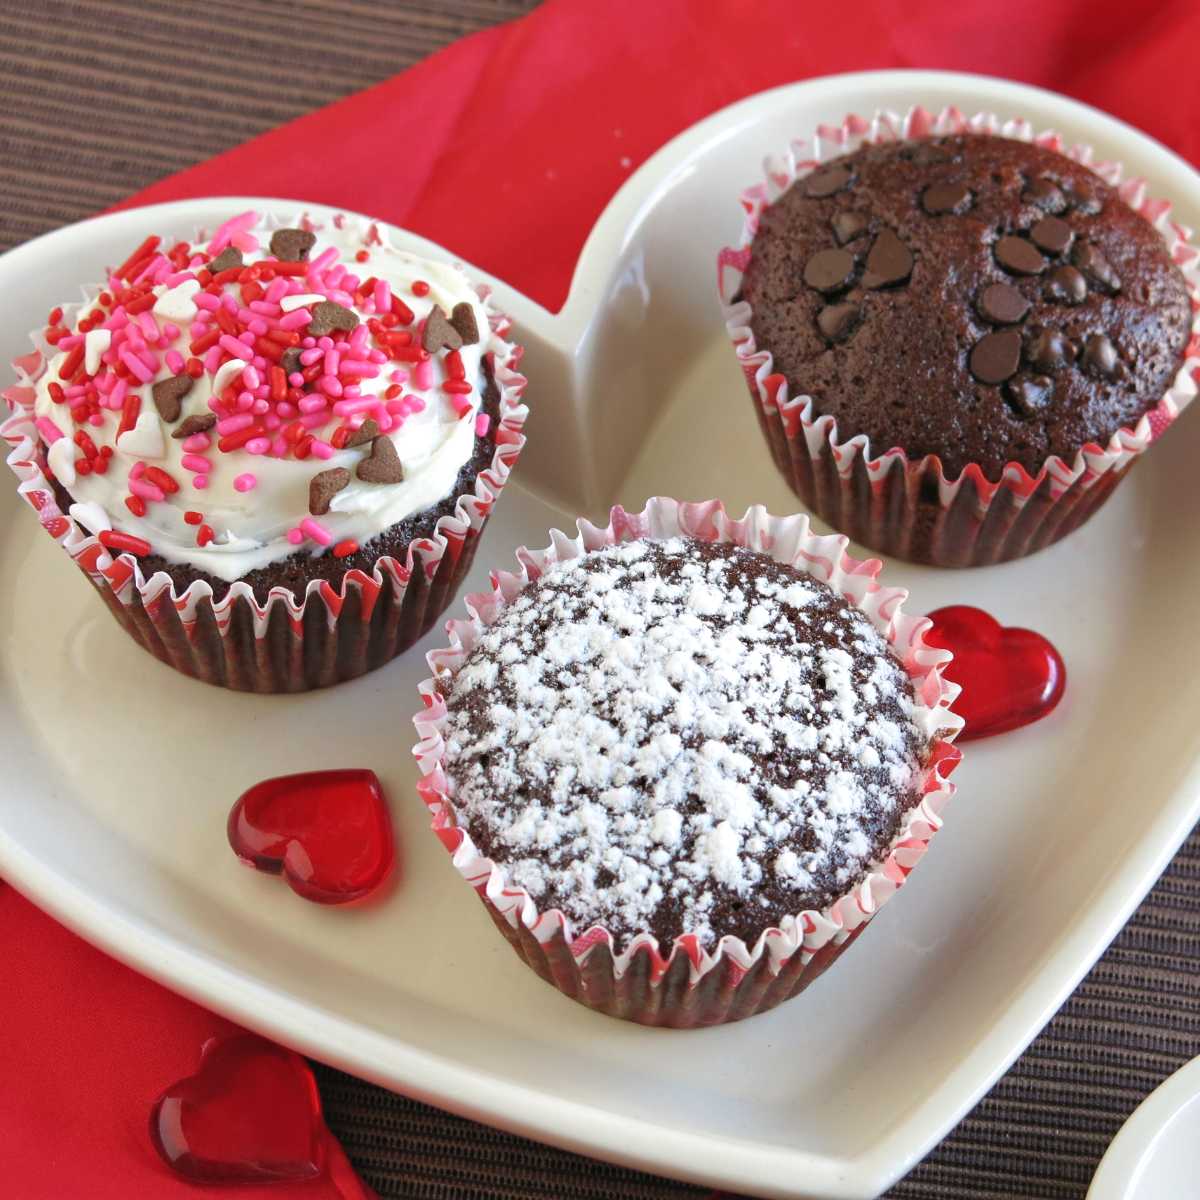 Three decorated eggless chocolate cupcakes: one with chocolate chips on top, one with powedered sugar, and one with vanilla frosting and sprinkles.